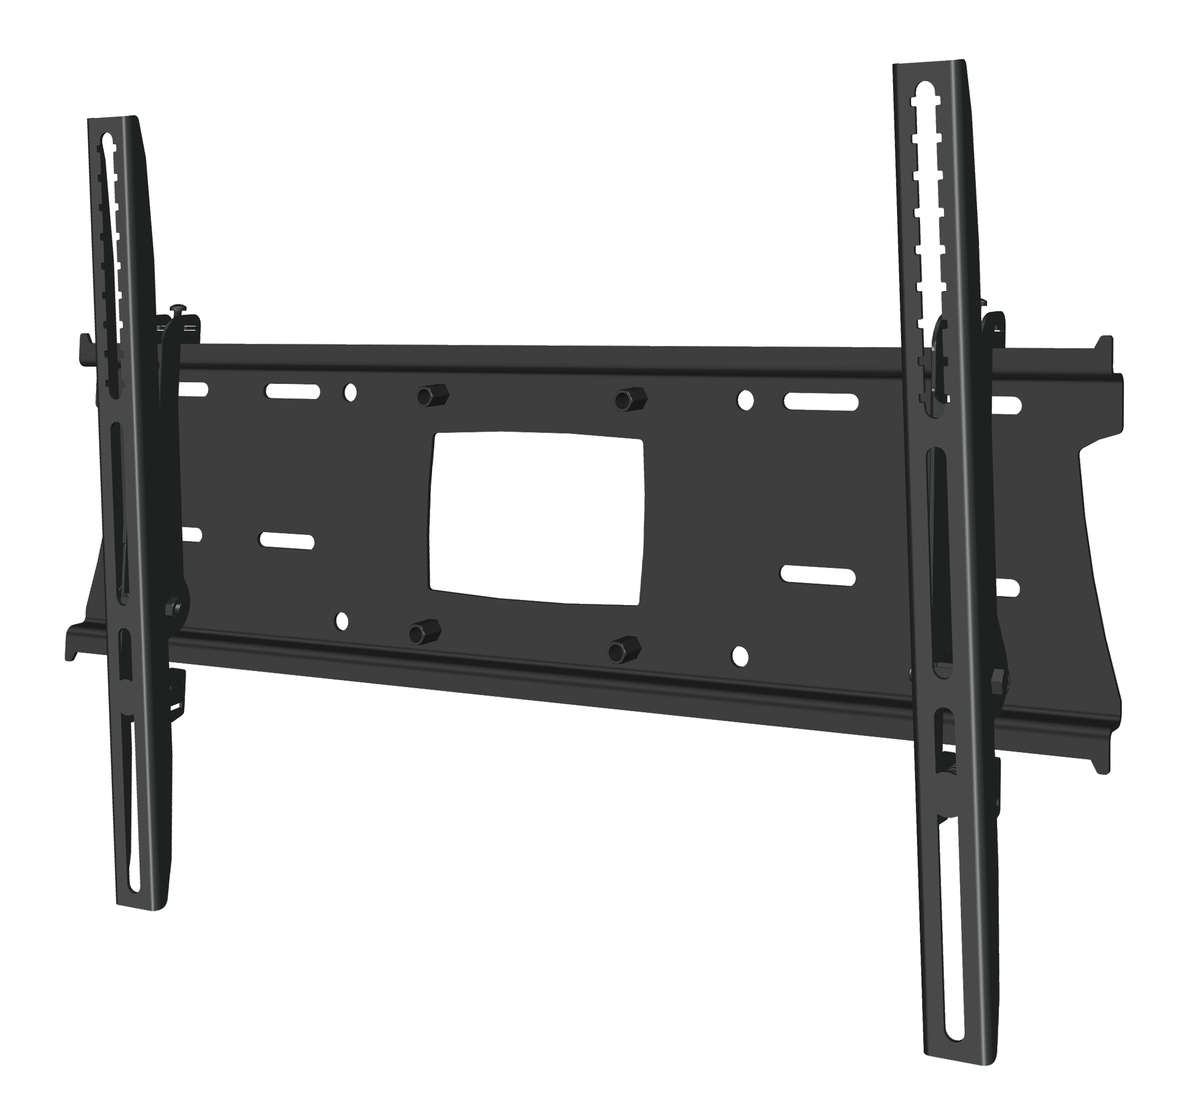 Unicol PZW1 Pozimount tilting wall mount for monitors from from 33 to 57 inches product image